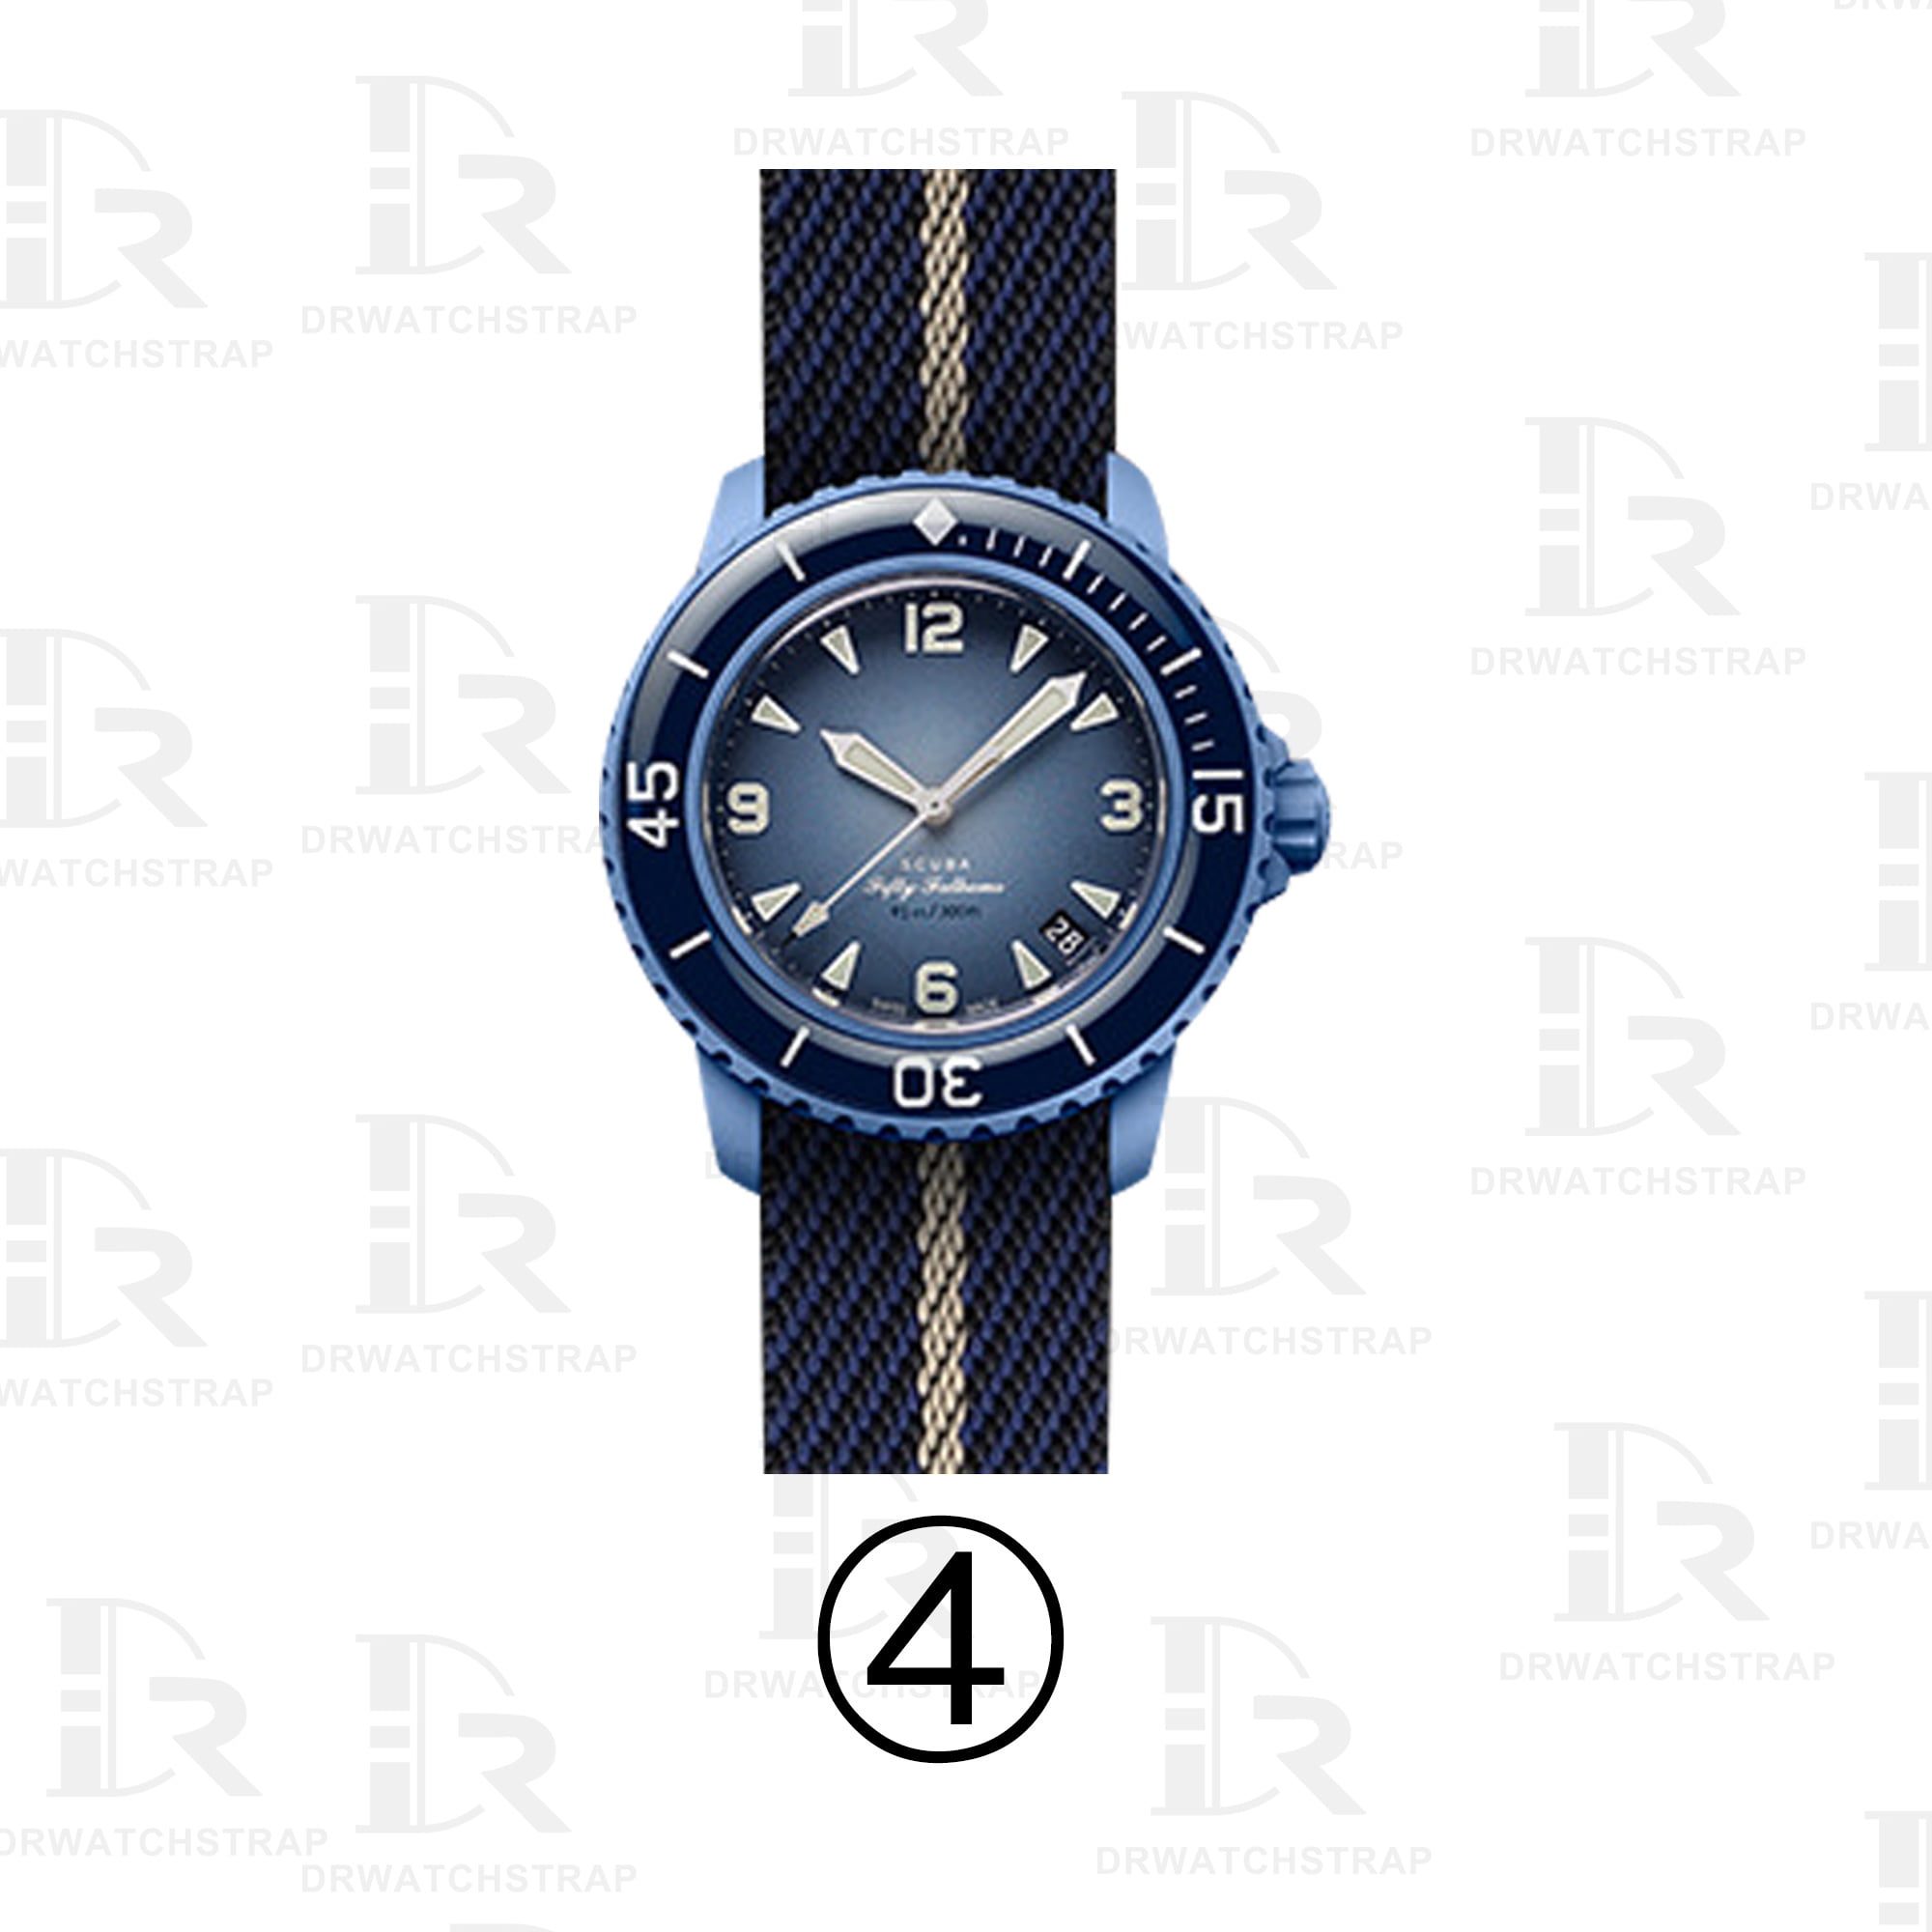 Buy Replacement Blancpain x Swatch watch bands Dark Blue 20mm Blancpain nato strap (2)